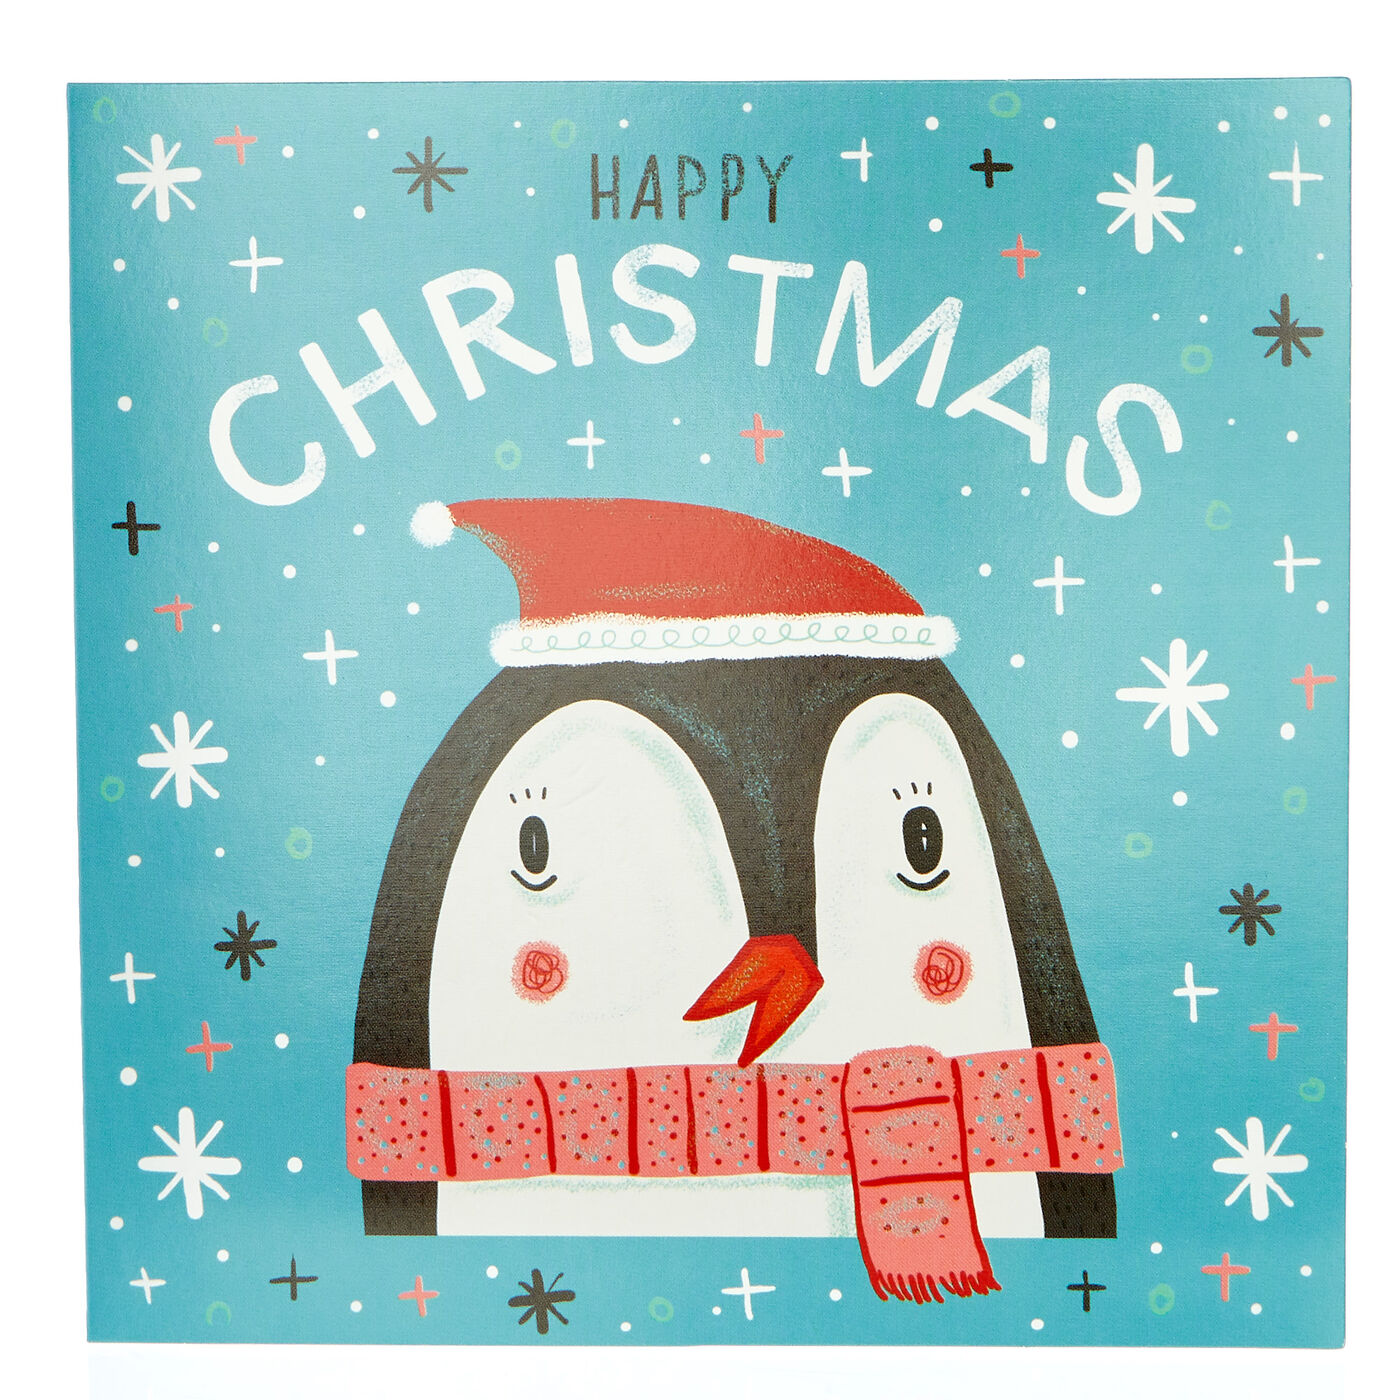 Buy 20 Children's Charity Christmas Cards - 4 Designs for GBP 1.99 ...